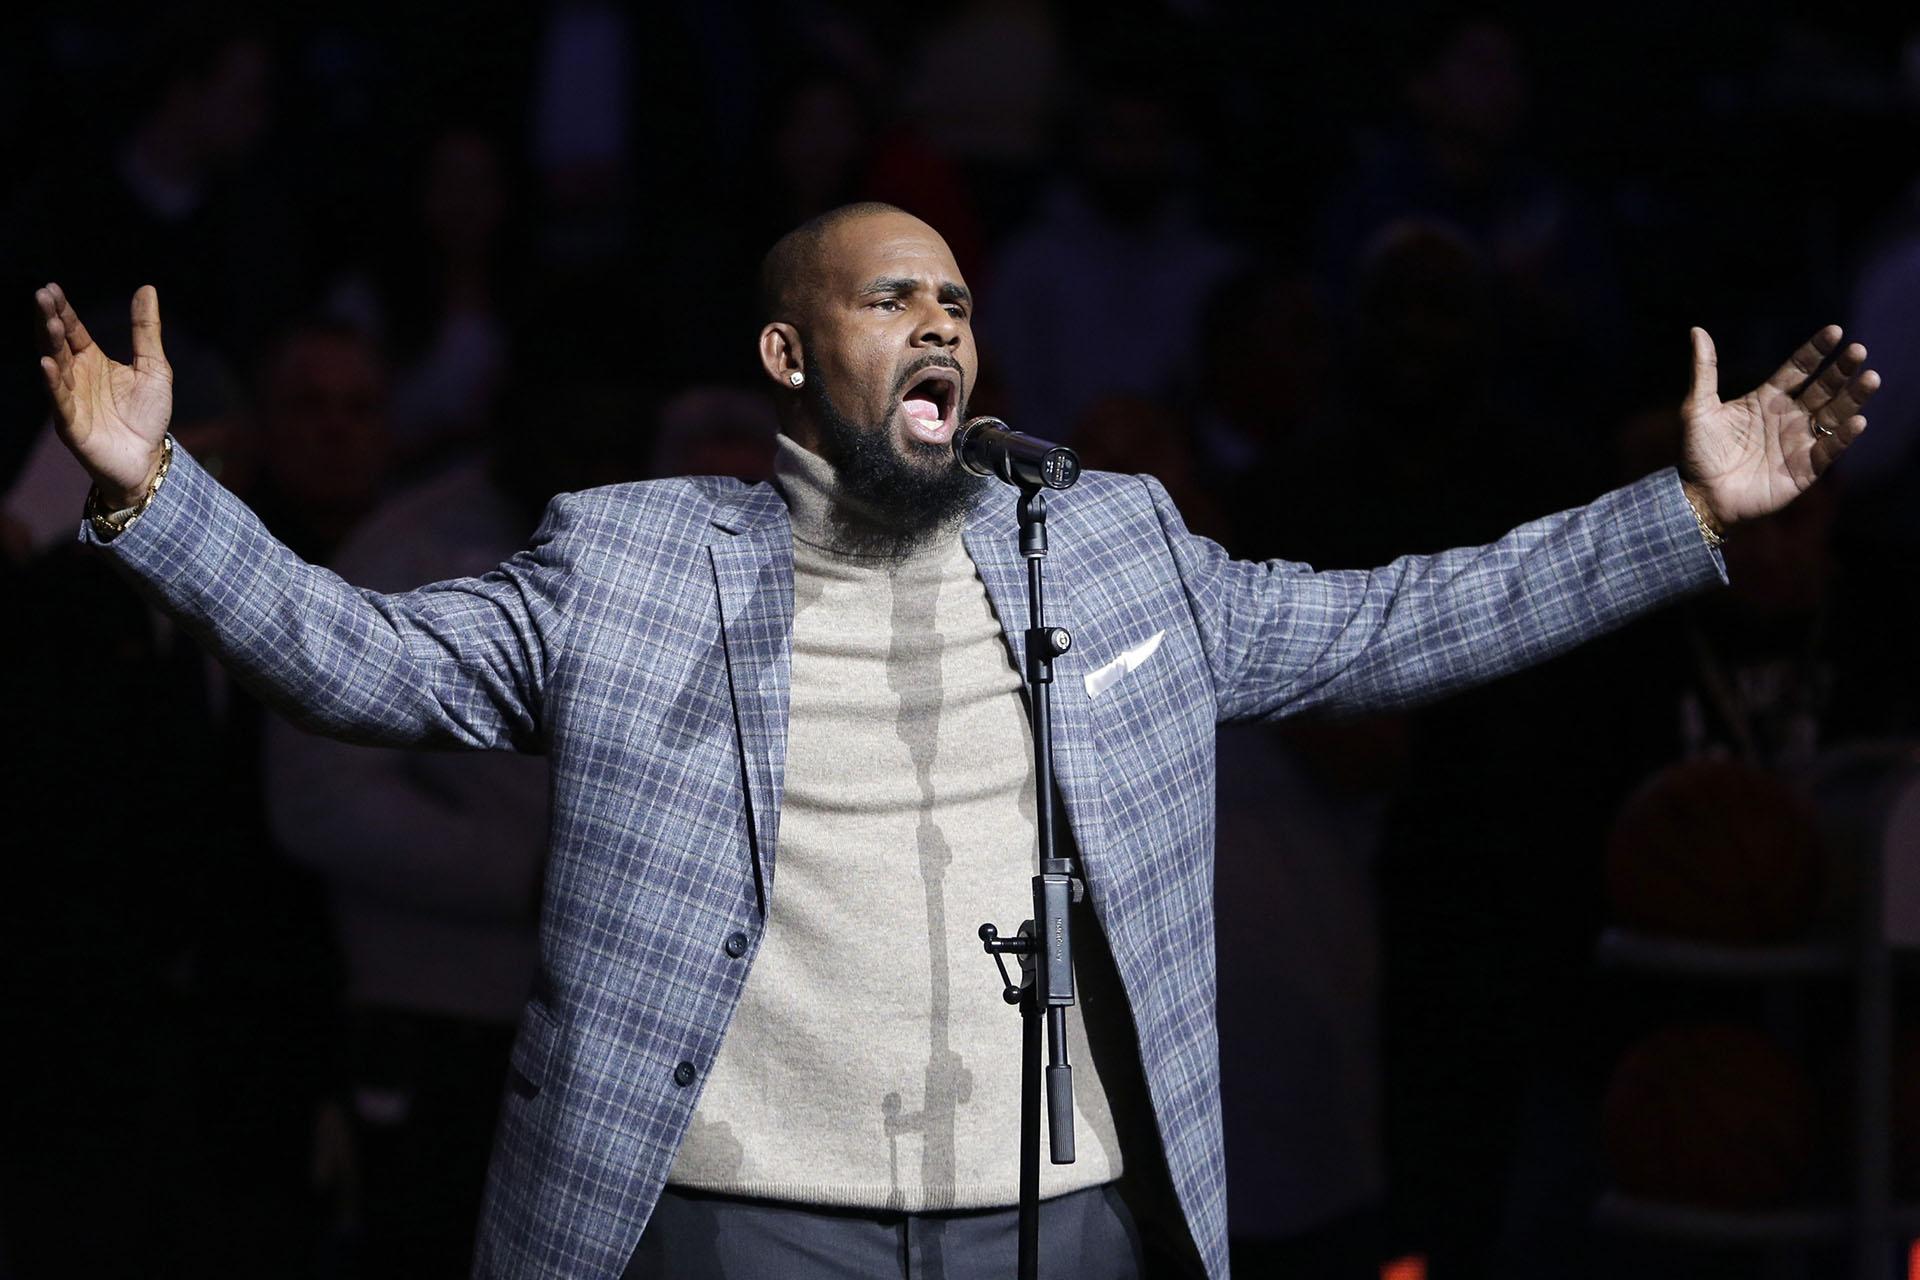 In this Nov. 17, 2015, file photo, musical artist R. Kelly performs the national anthem before an NBA basketball game between the Brooklyn Nets and the Atlanta Hawks in New York. (AP Photo / Frank Franklin II, File)